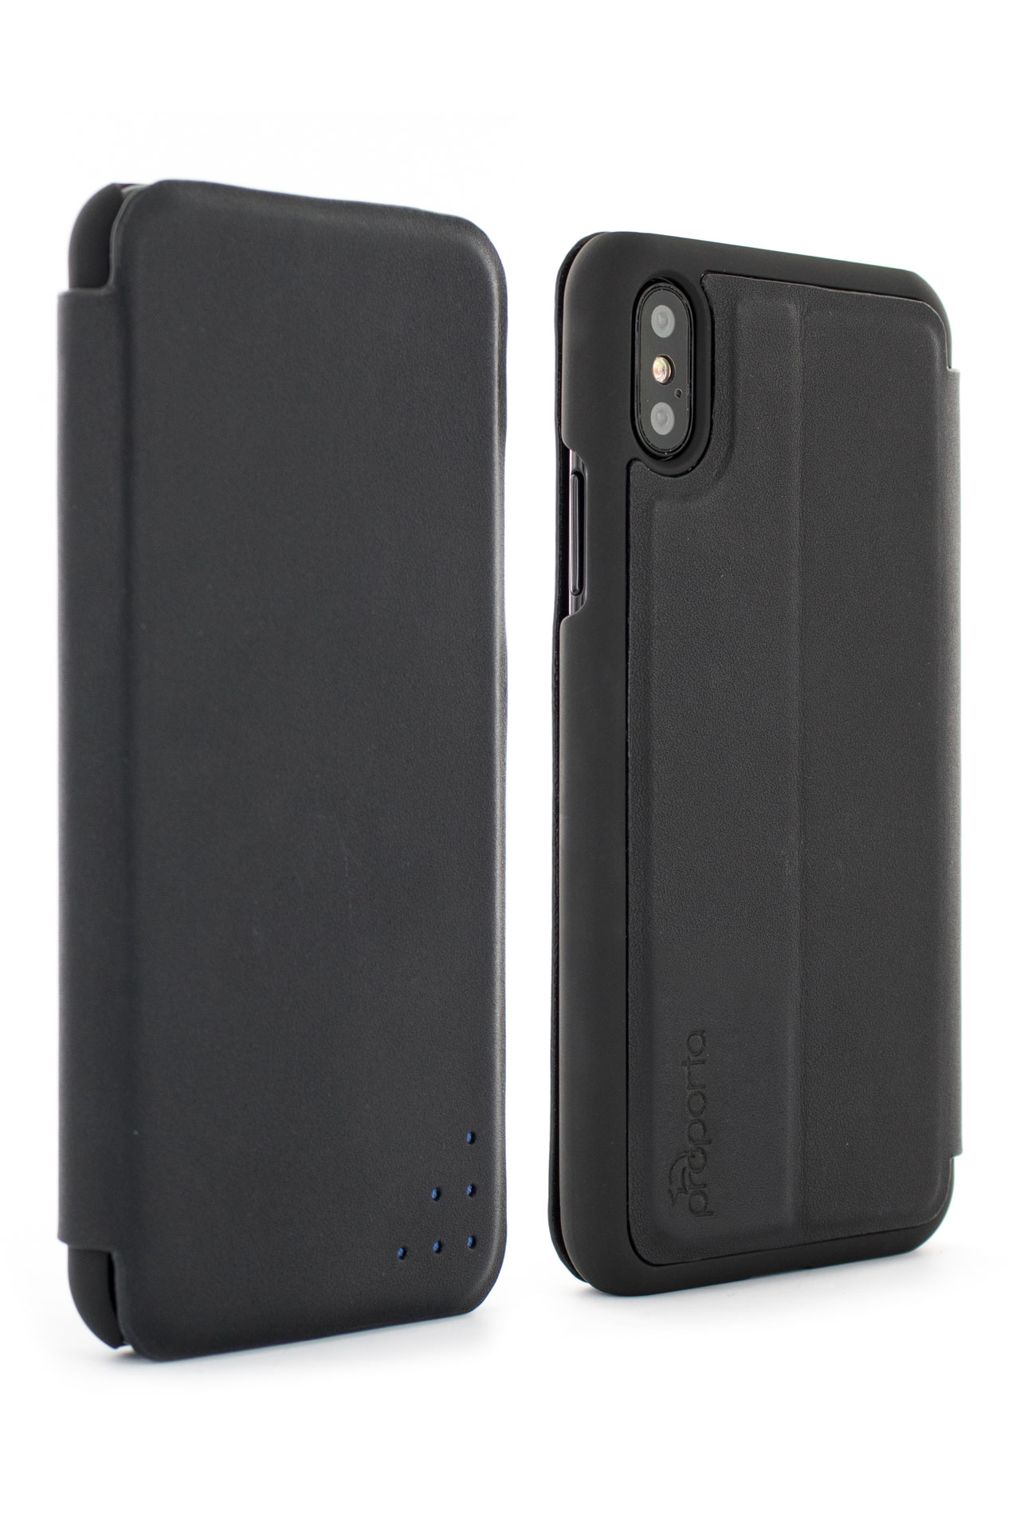 Durable iPhone X case